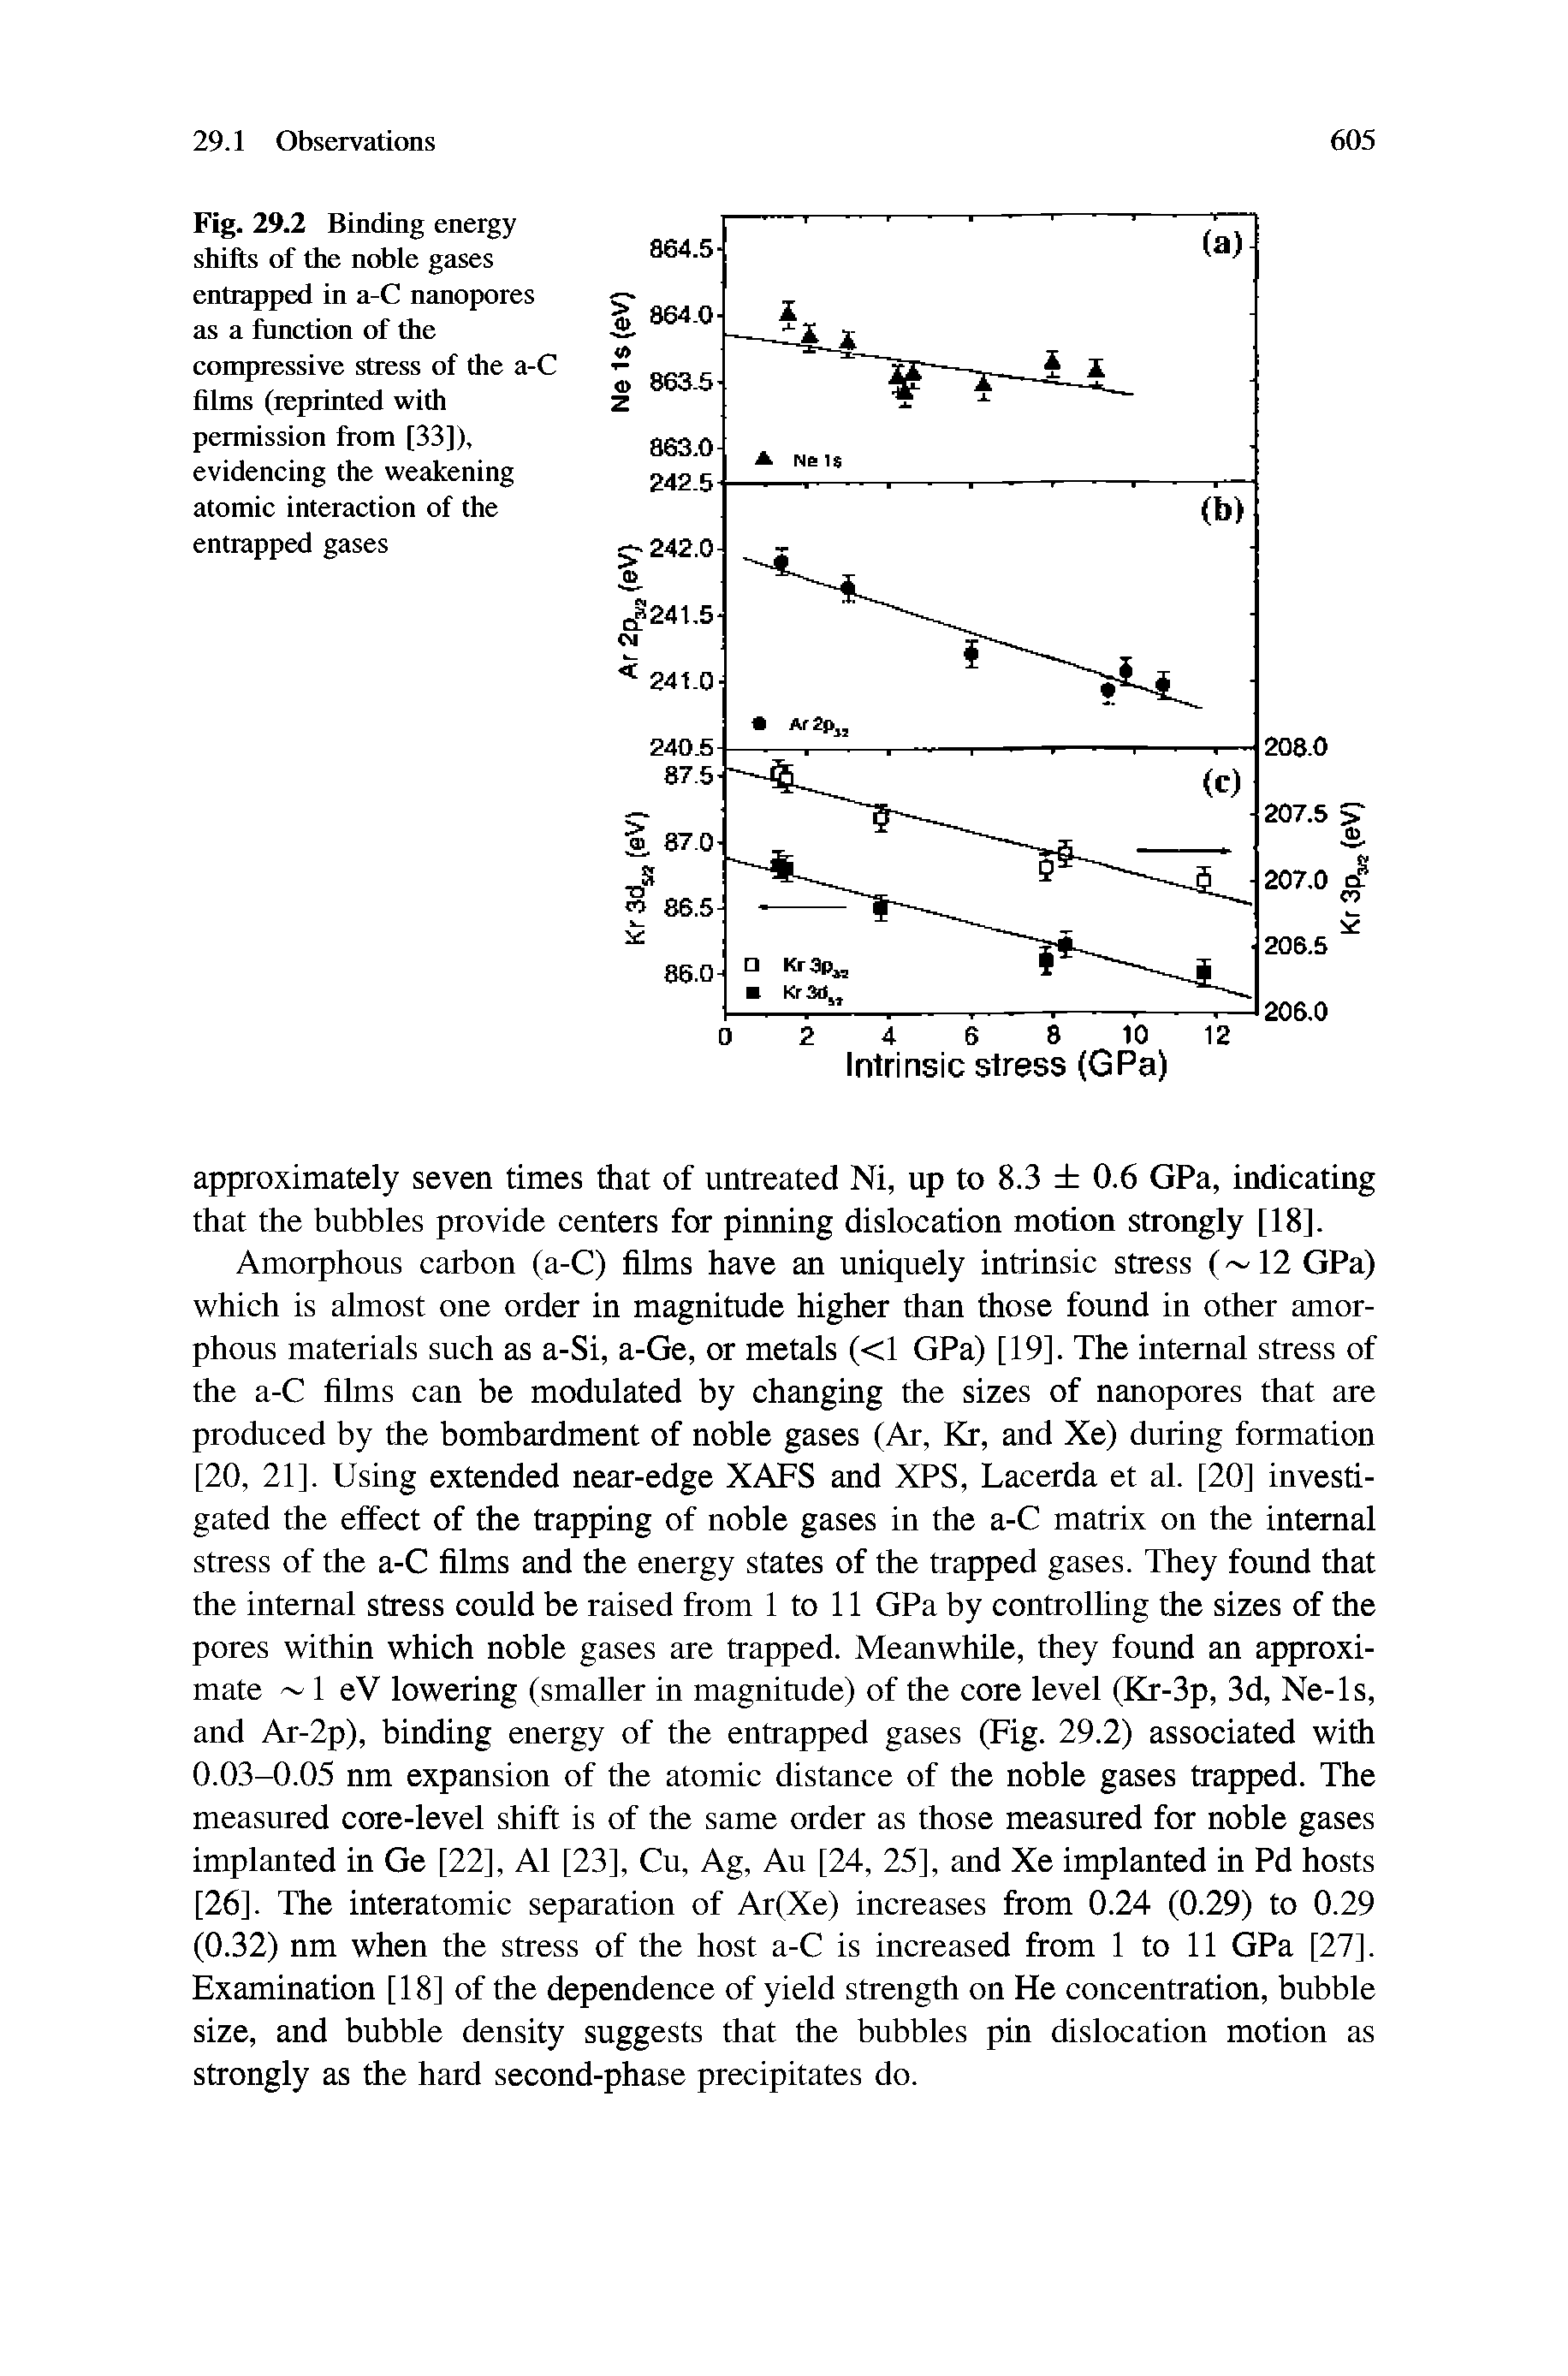 Fig. 29.2 Binding energy shifts of the noble gases entrapped in a-C nanopores as a function of the compressive stress of the a-C films (reprinted with permission from [33]), evidencing the weakening atomic interaction of the entrapped gases...